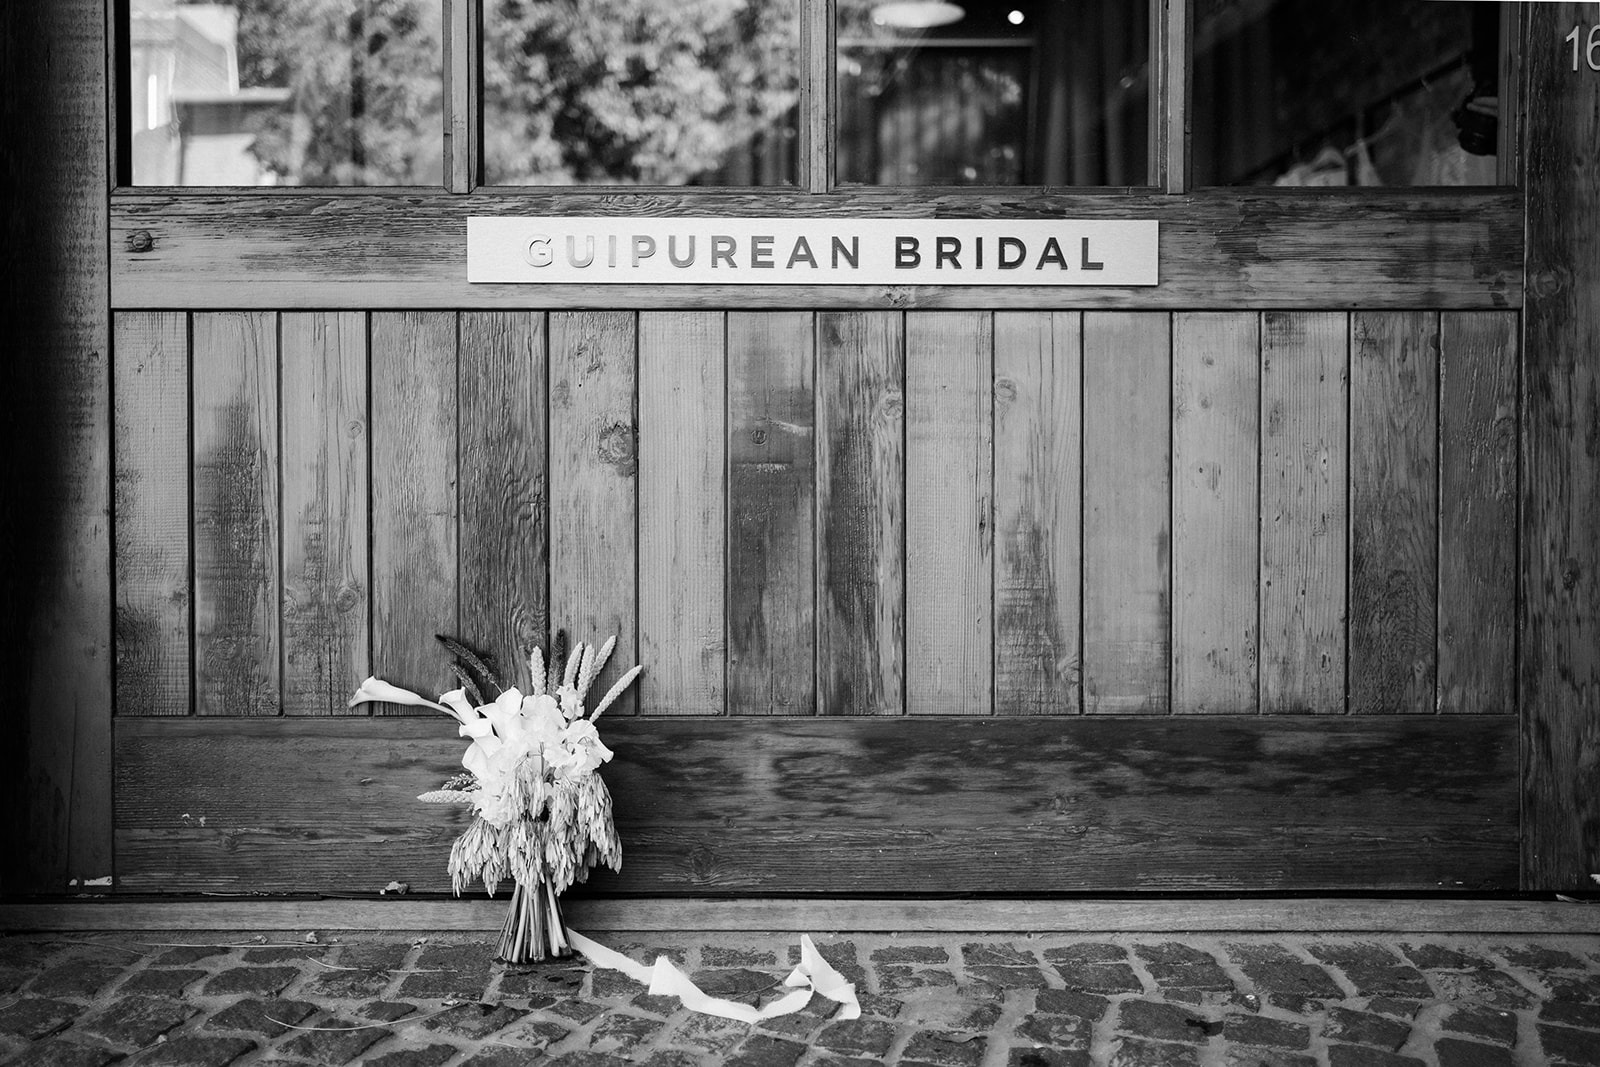 black and white Guipurean Bridal name plate with flower bouquet